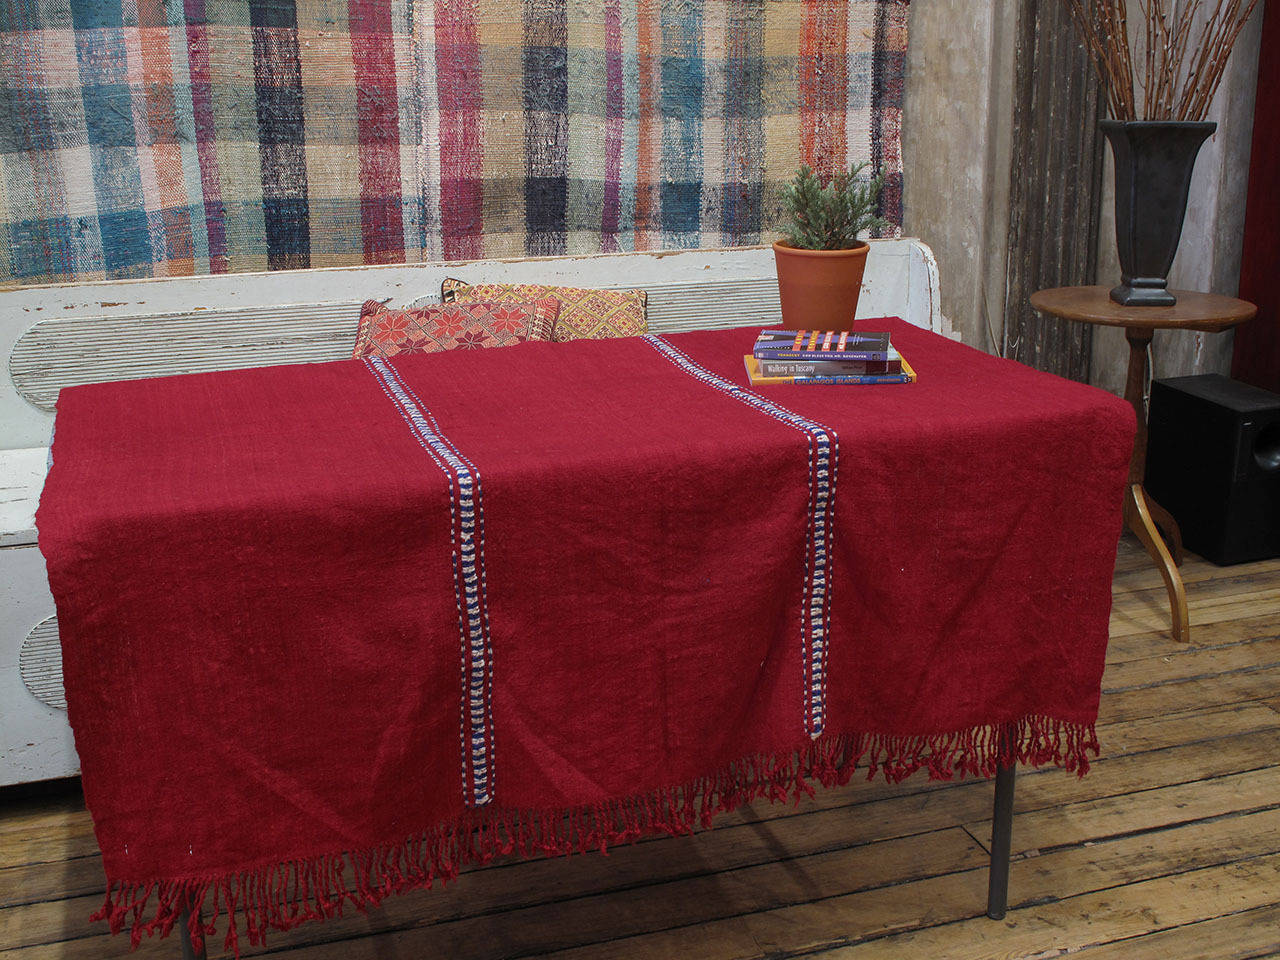 A small tribal cover with a delicate and light-weight weave, possibly used as a cradle cover or baby blanket. The intricate stitching between panels and the braided fringes are very finely done.